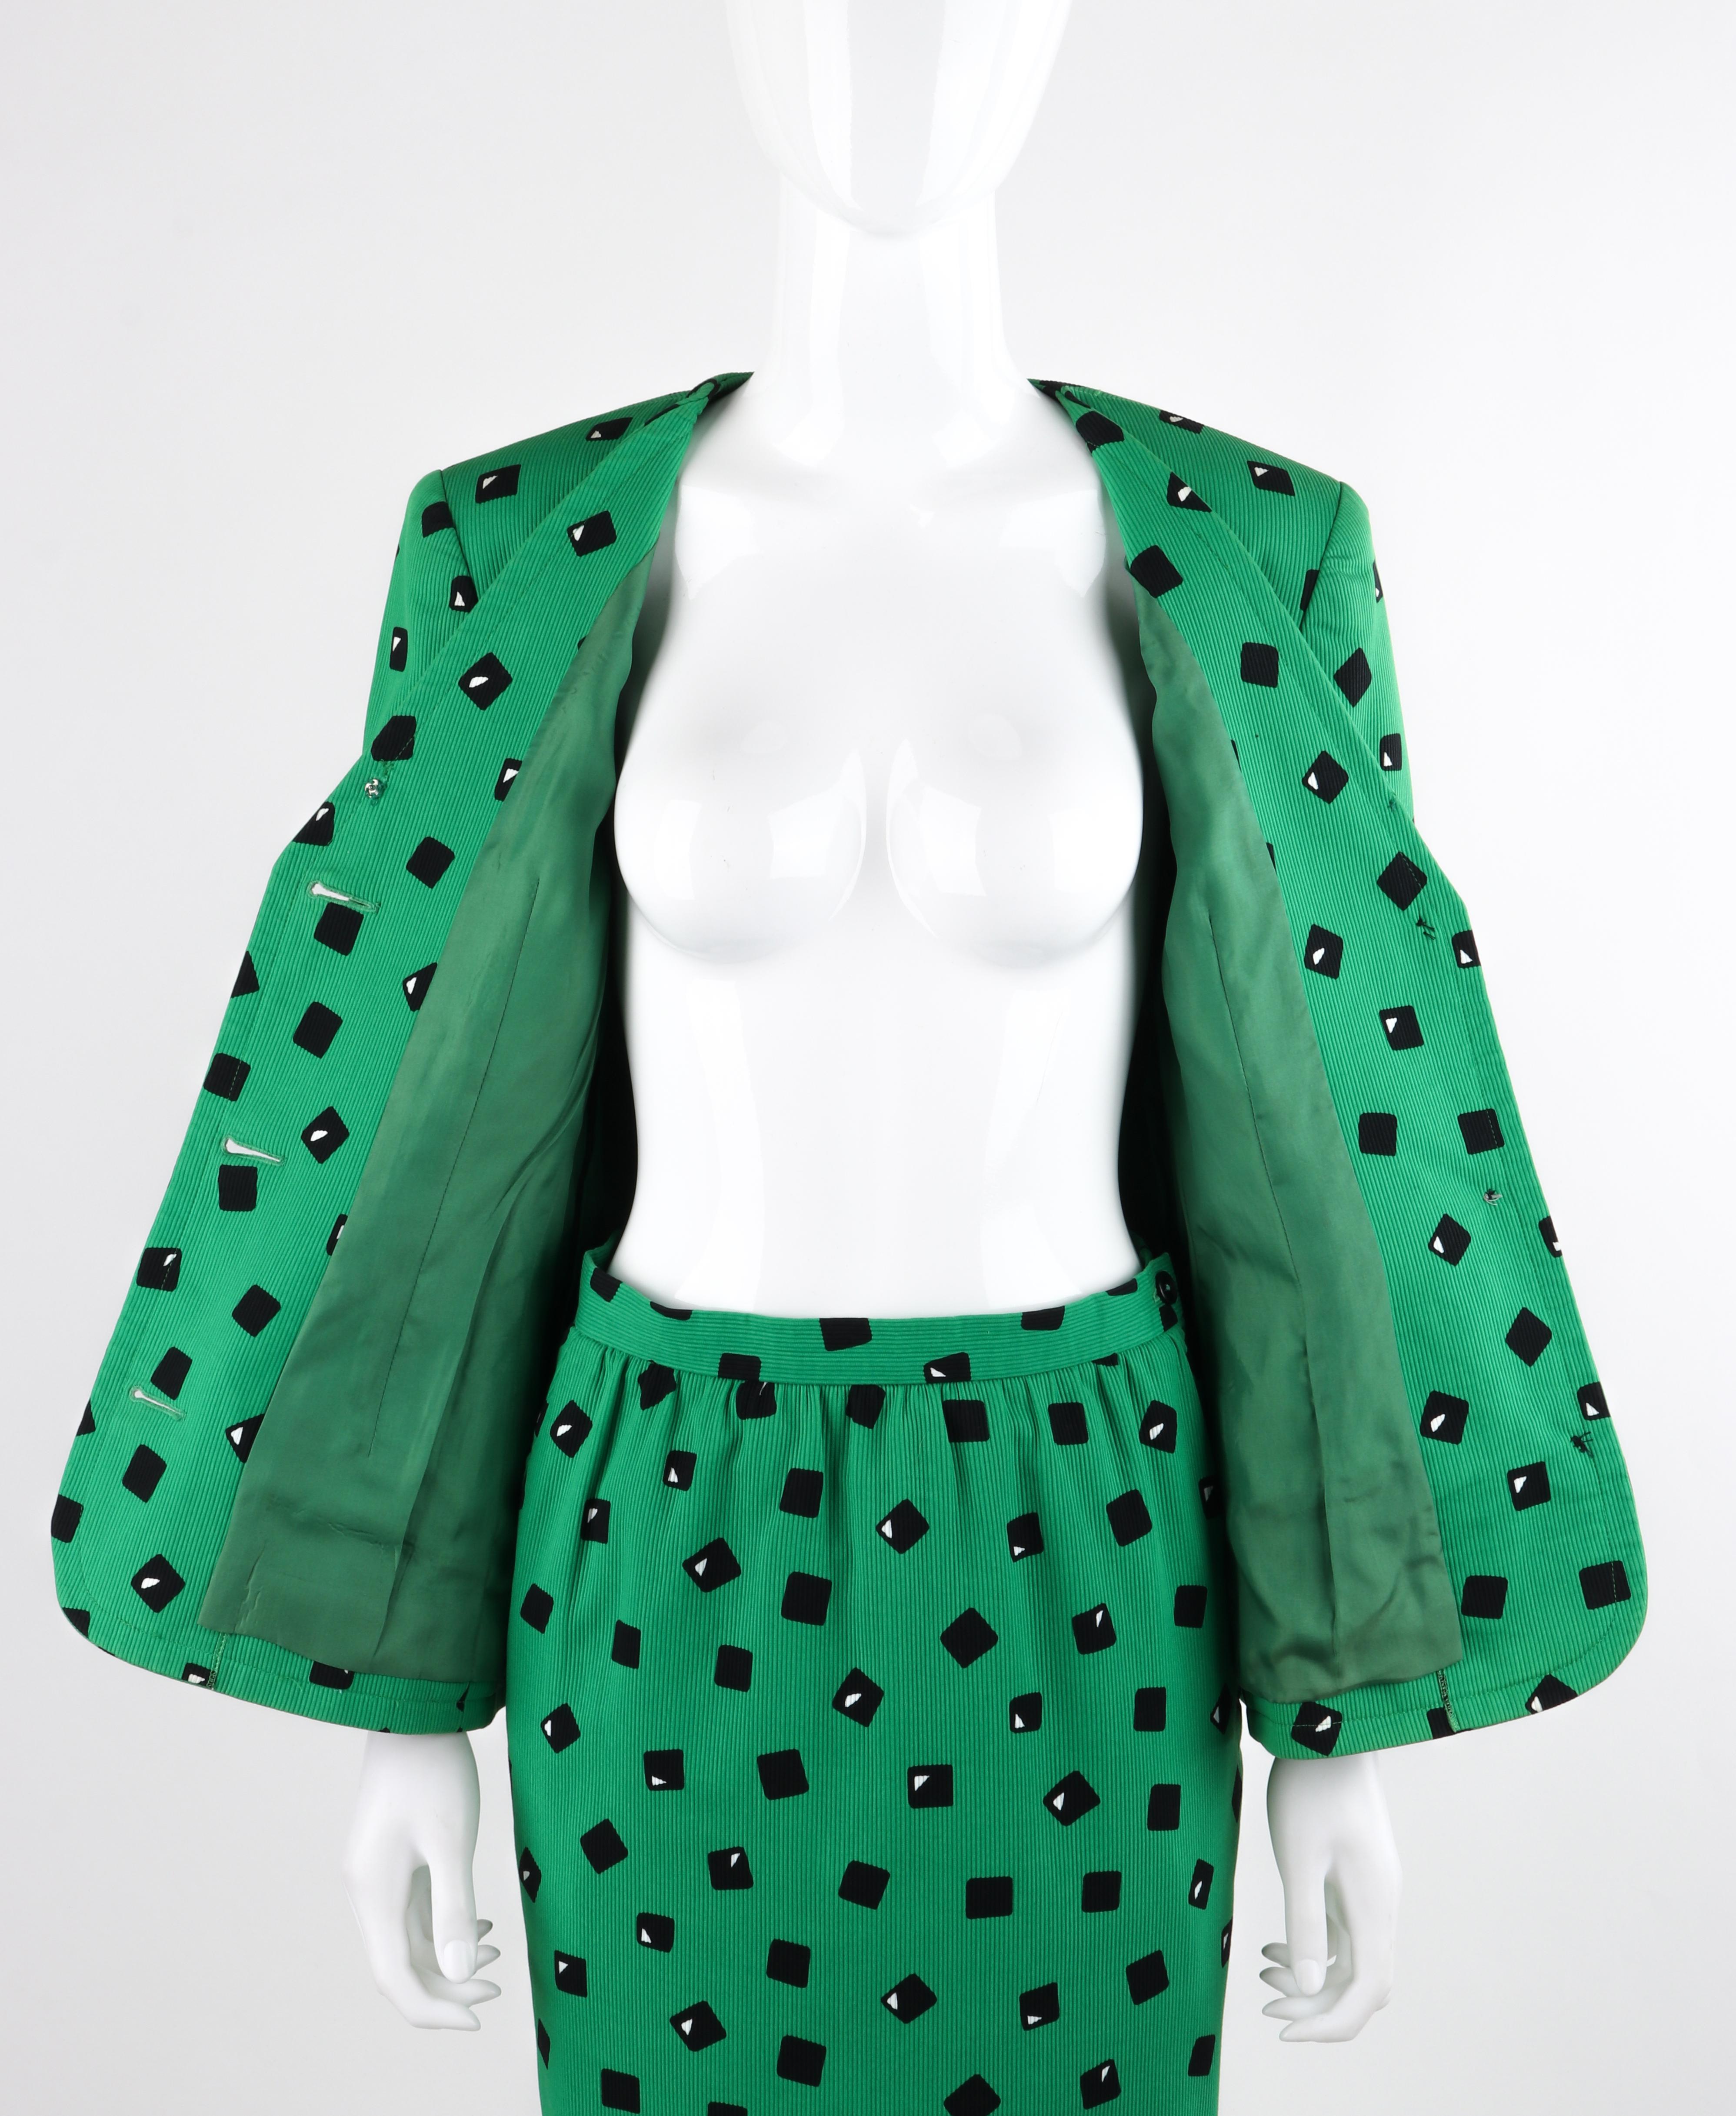 Blue Couture HUBERT de GIVENCHY c.1980’s Green Black Blazer Skirt Suit Set Numbered For Sale